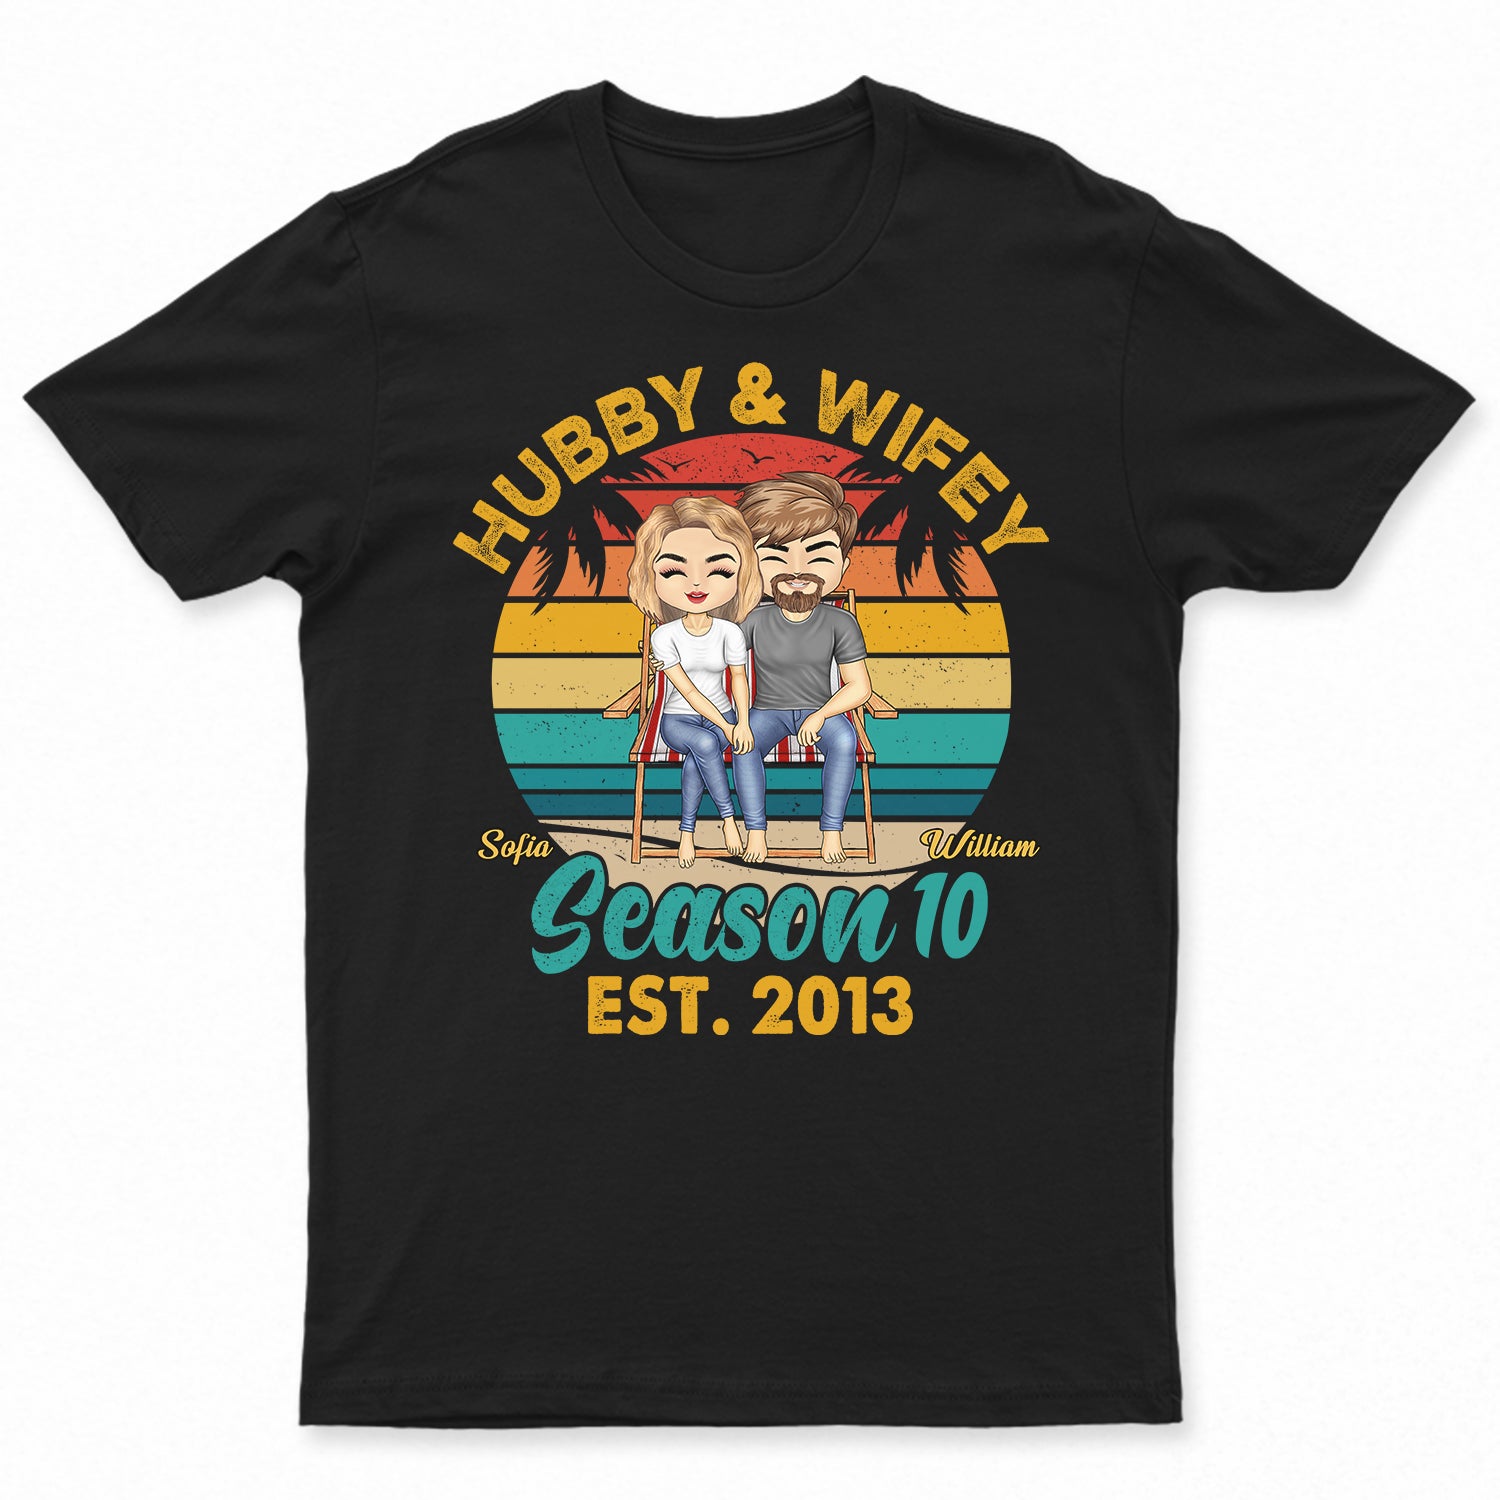 Hubby And Wifey Seasons Beach - Birthday, Anniversary Gift For Spouse, Lover, Husband, Wife, Boyfriend, Girlfriend, Couple - Personalized Custom T Shirt